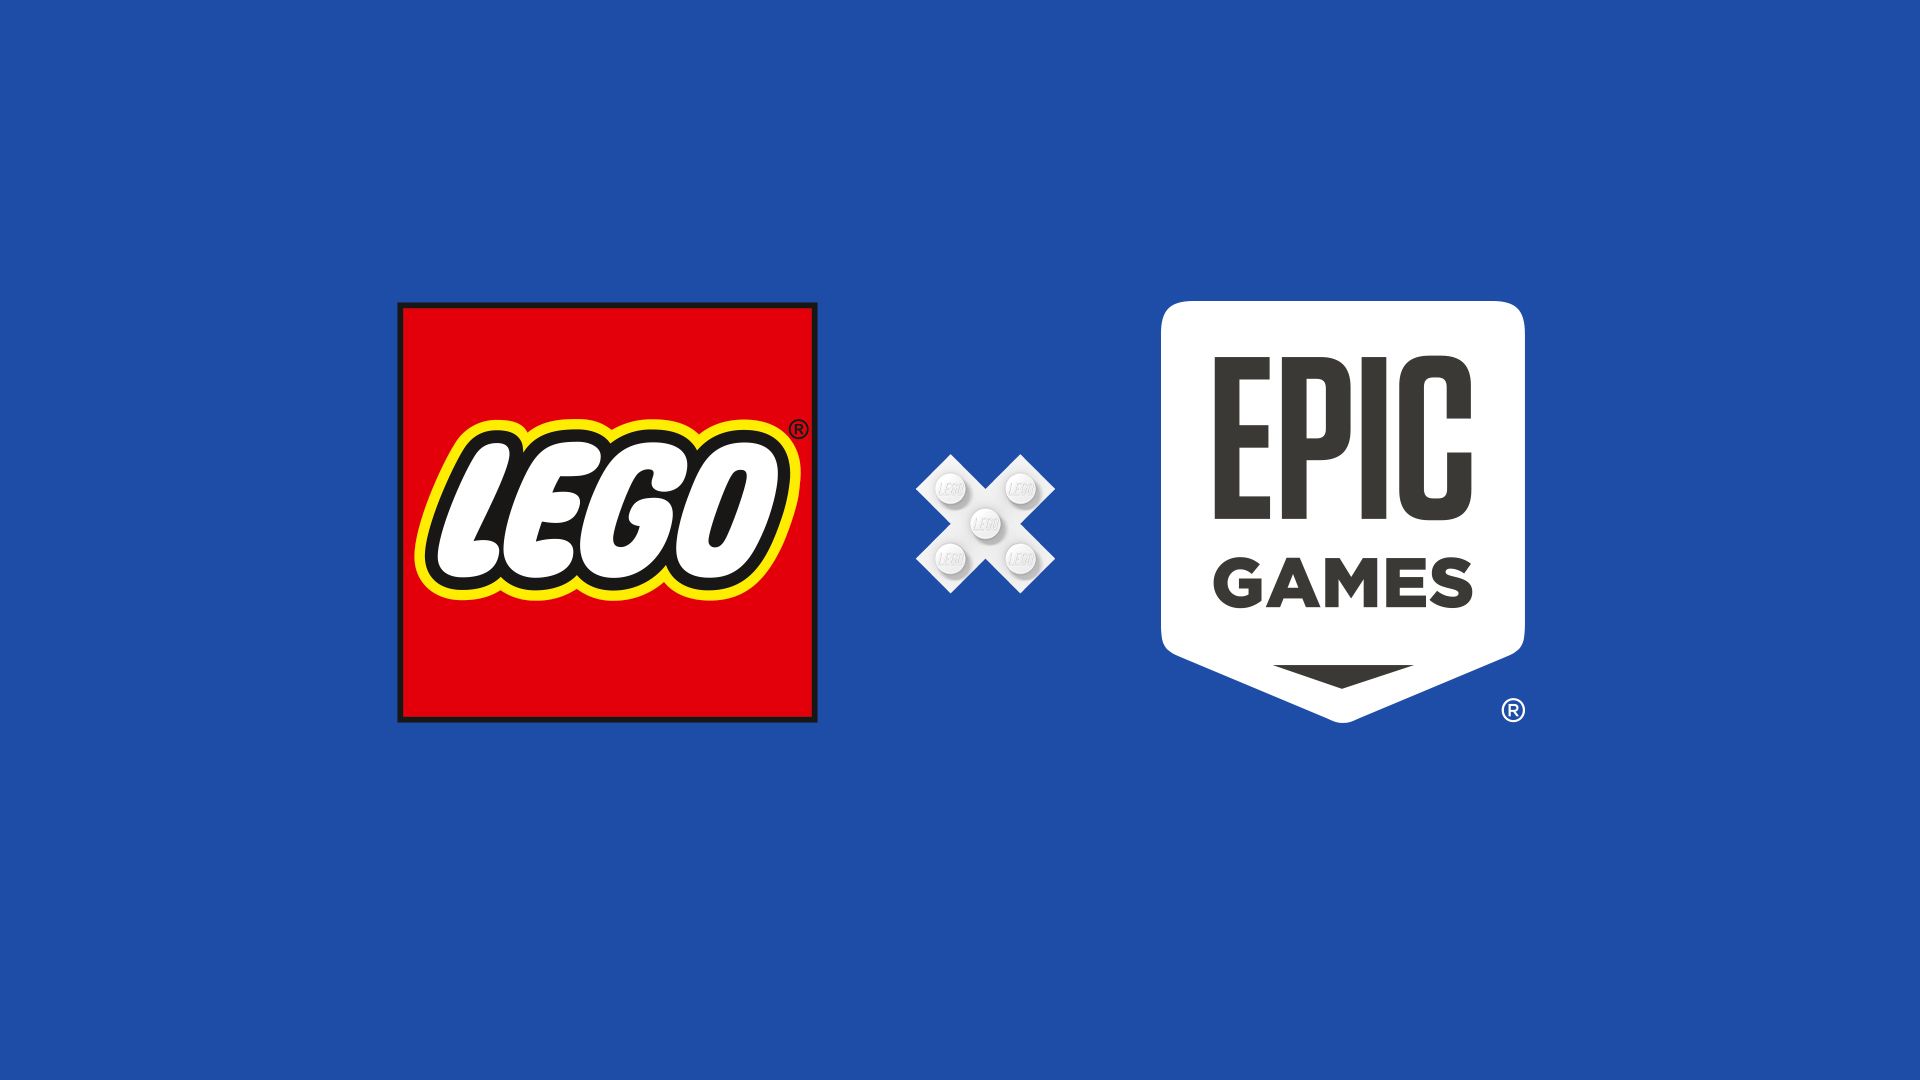 The Lego and Epic logos against a blue background with lego bricks making an X between the two logos